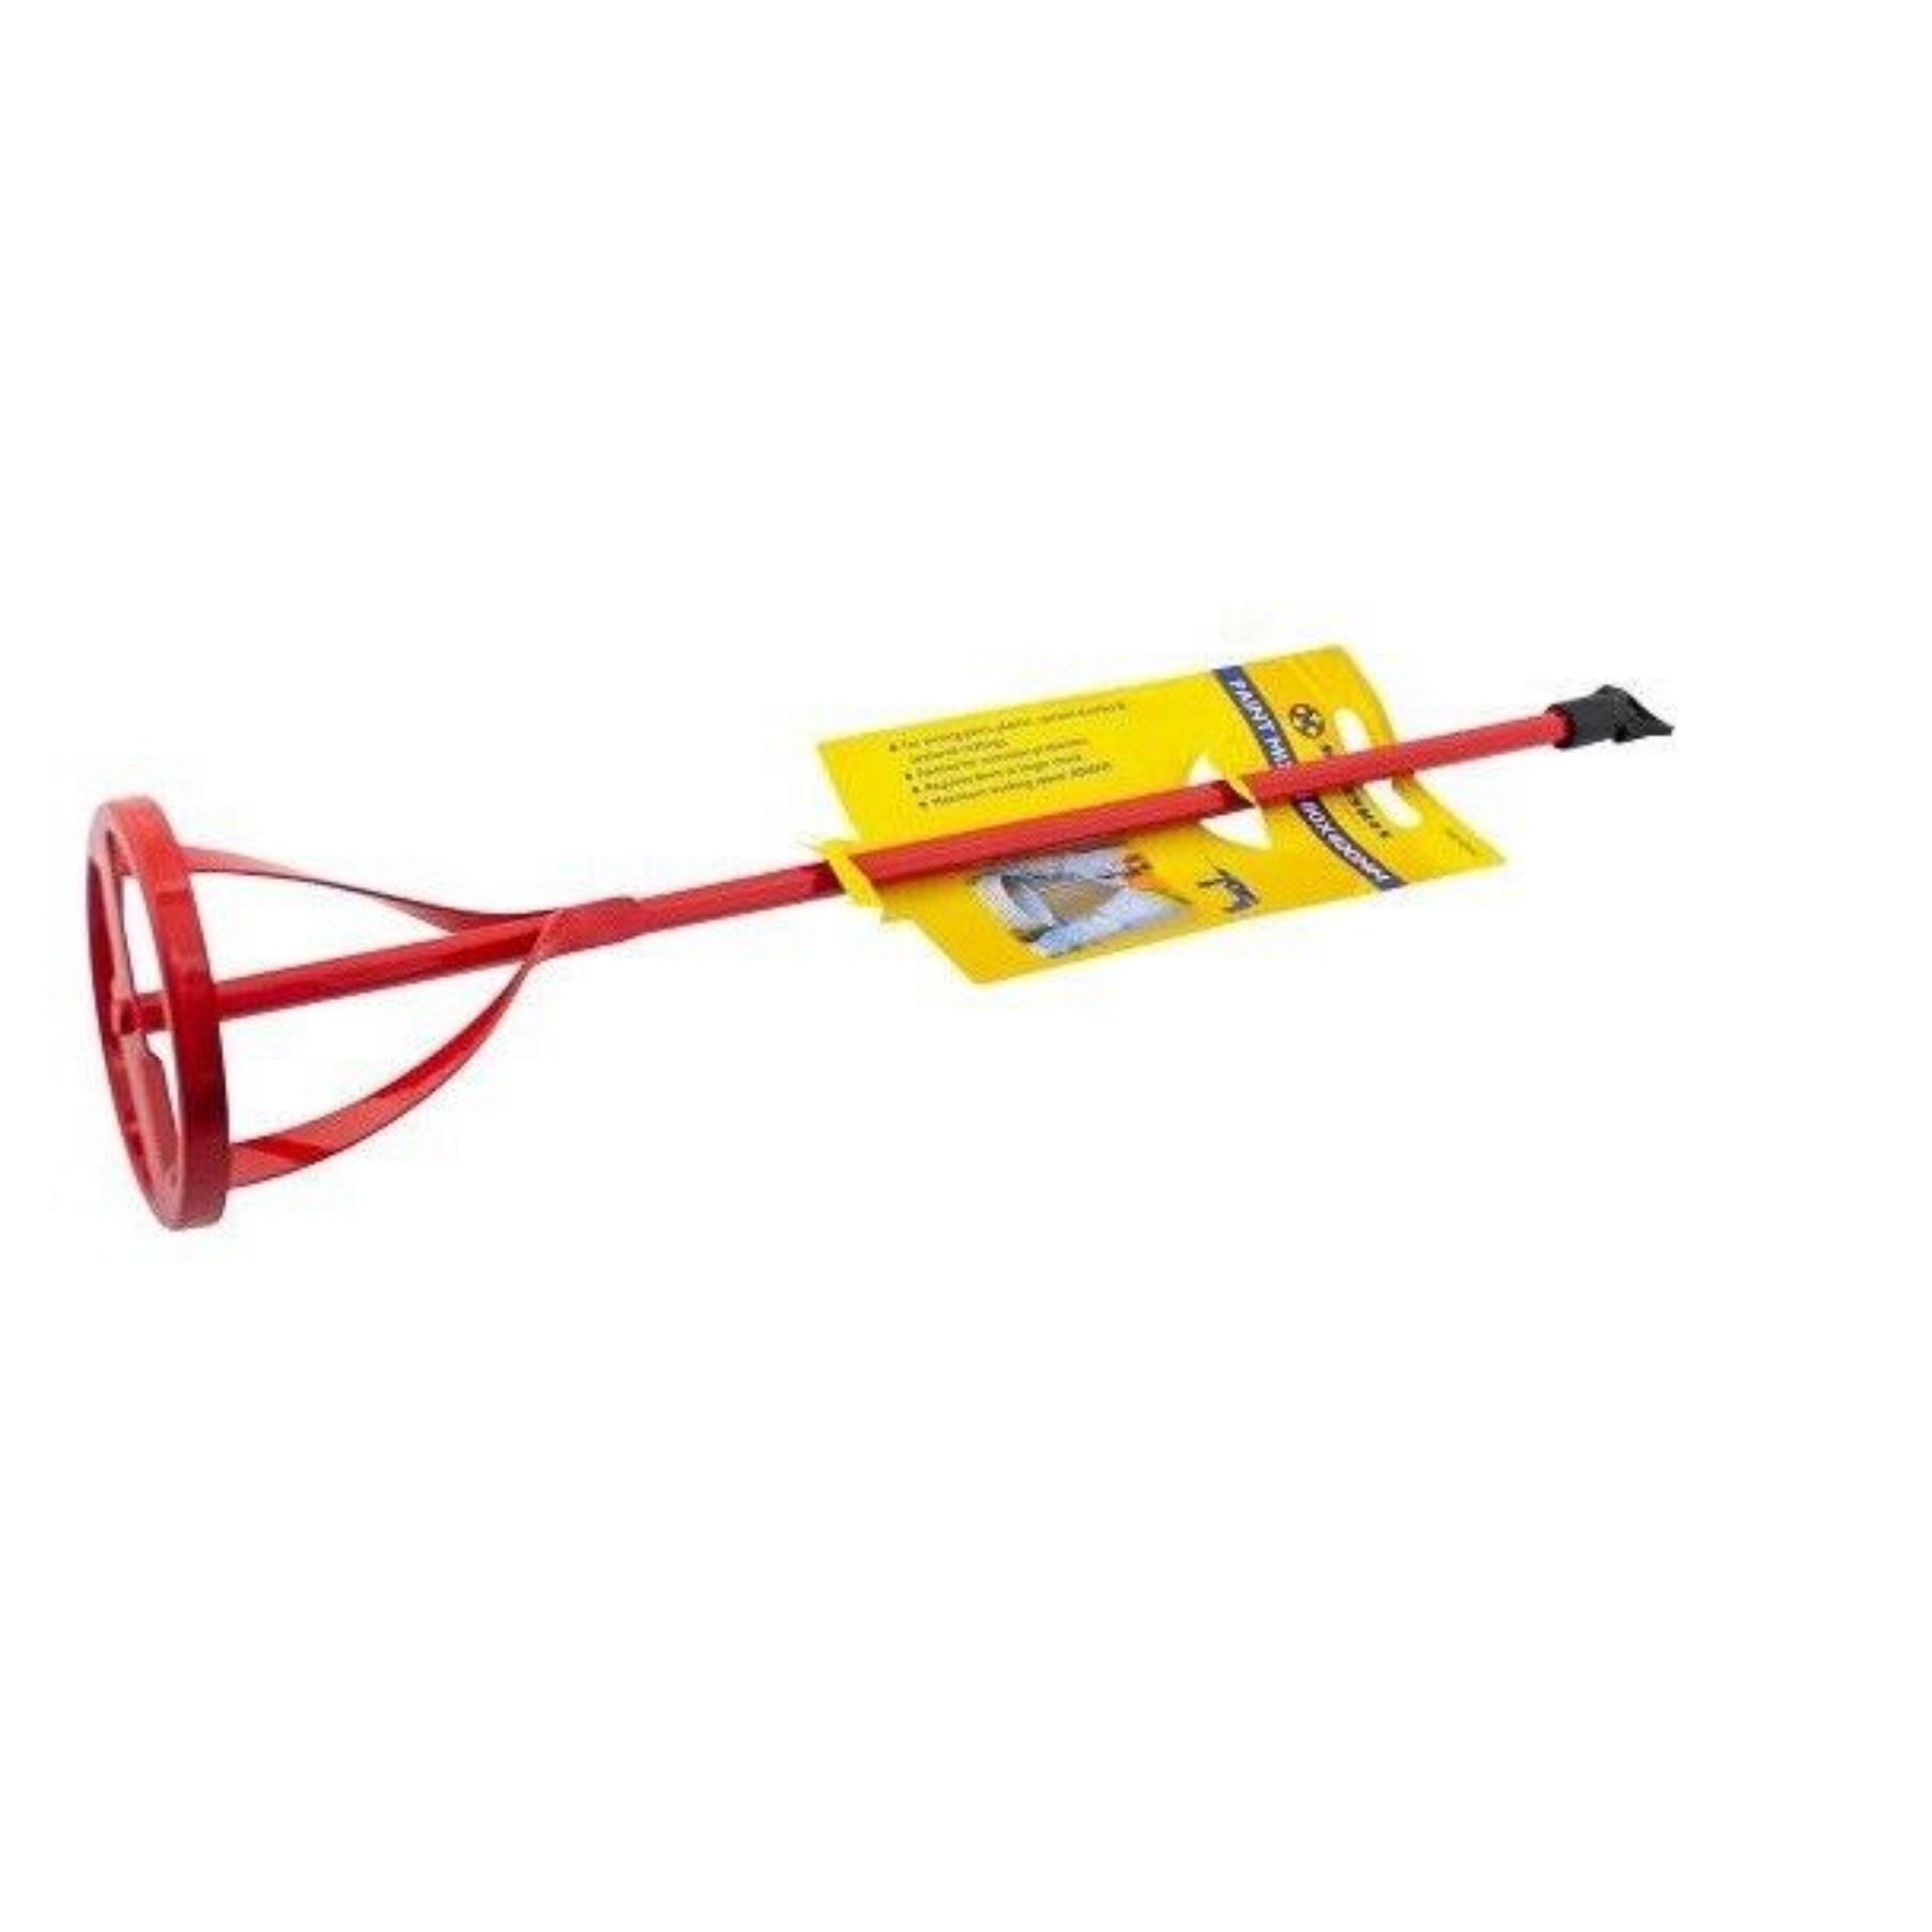 Beclen Harp Red Drill Paint/Cement Pot Plaster Mixer/Stirrer/Mixing Paddle Whisk Tool HEX